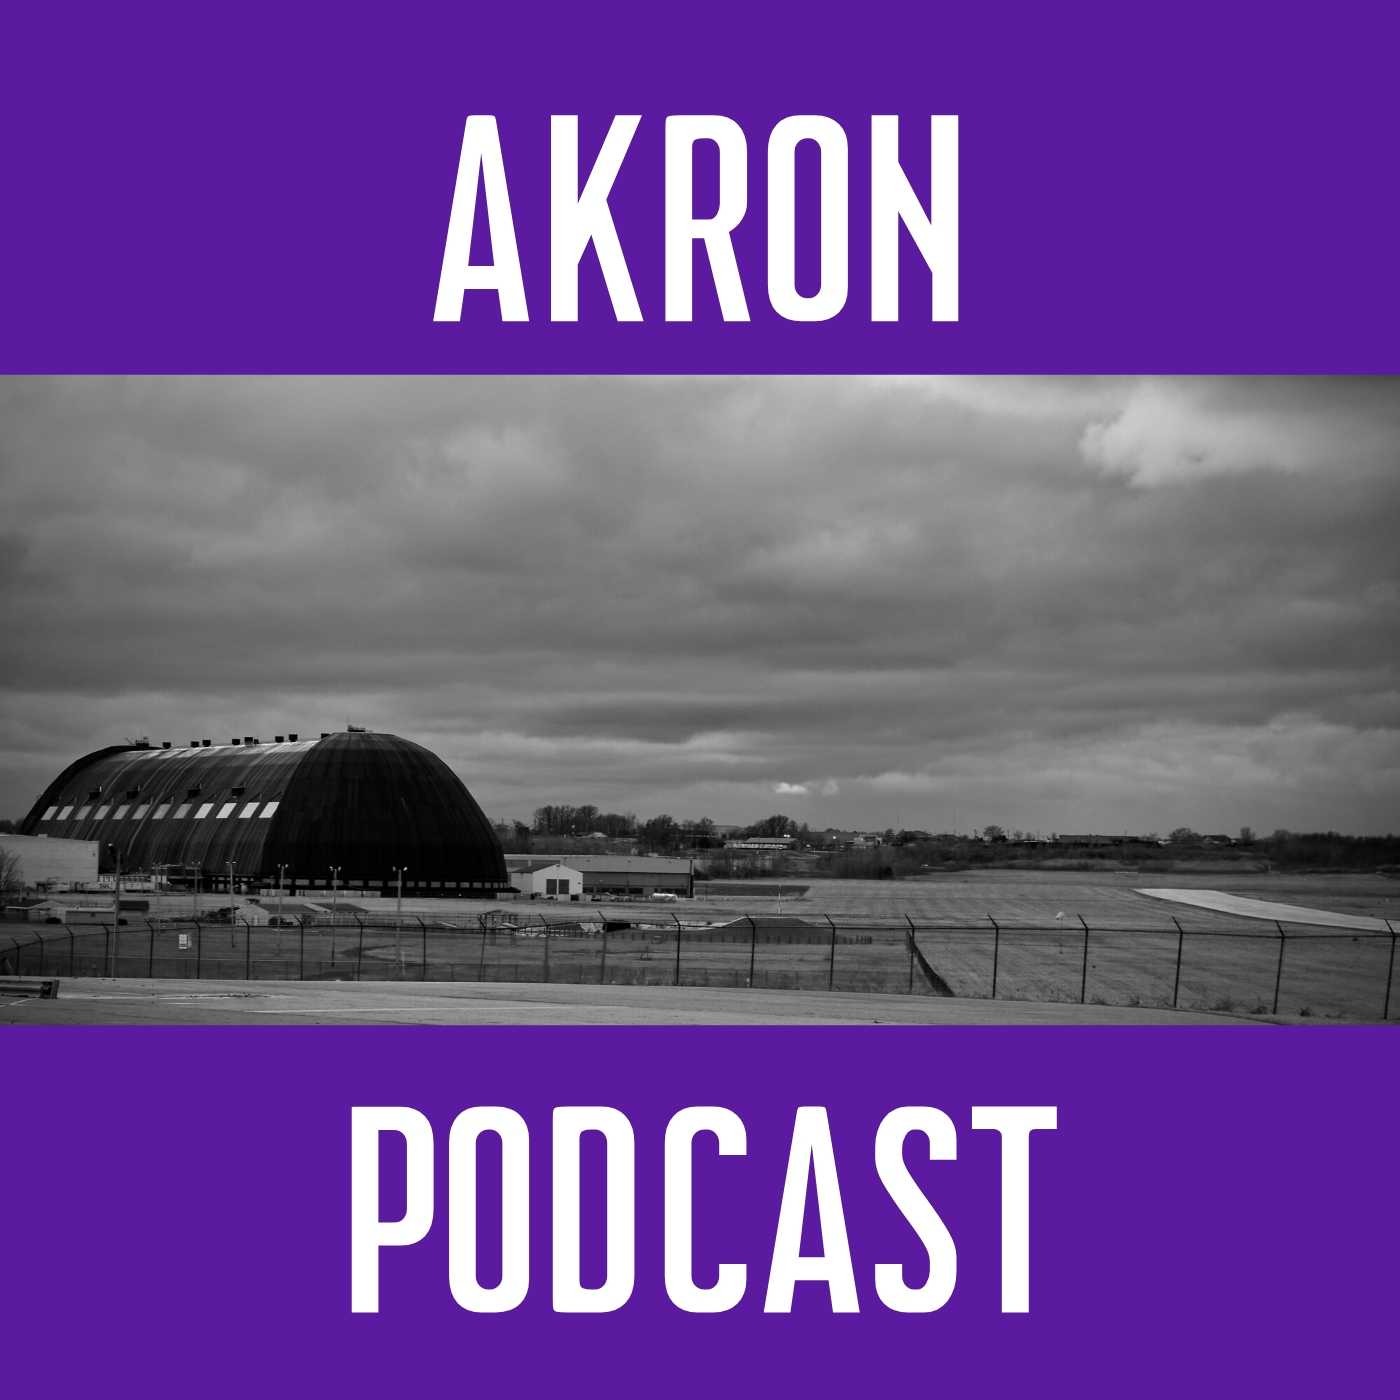 What to Expect from the Akron Podcast Image